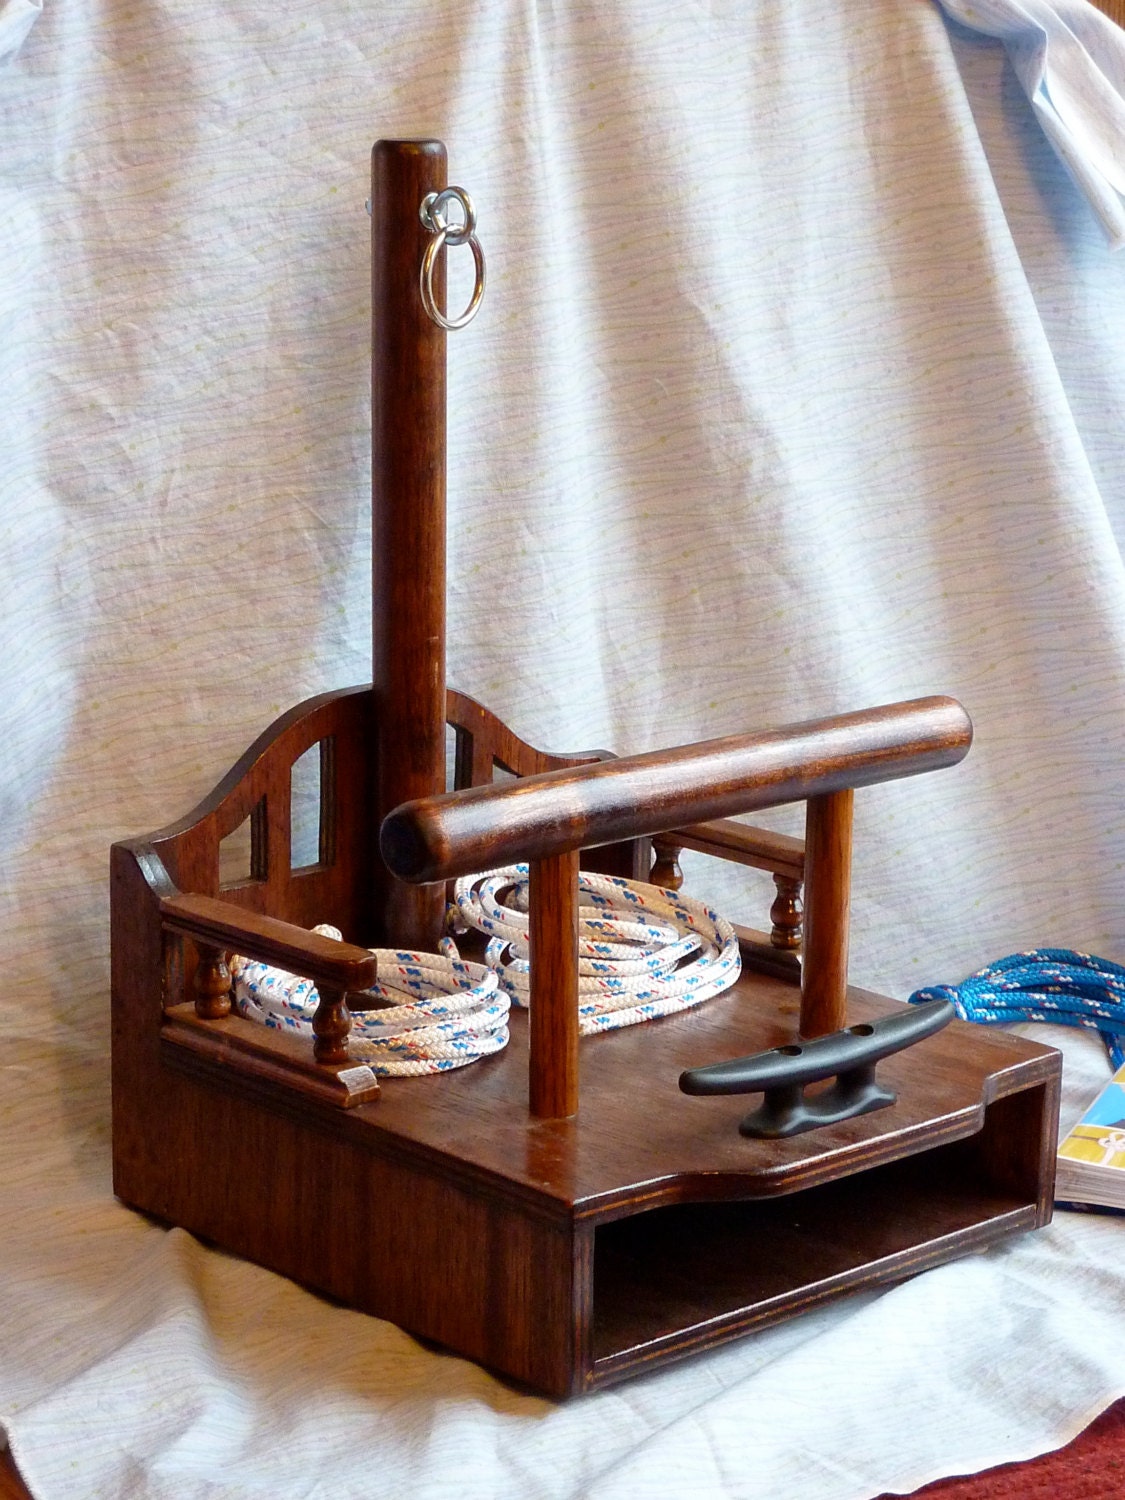 Deluxe Decorative Knot Tying Station Built Like a Ship's Quarterdeck 